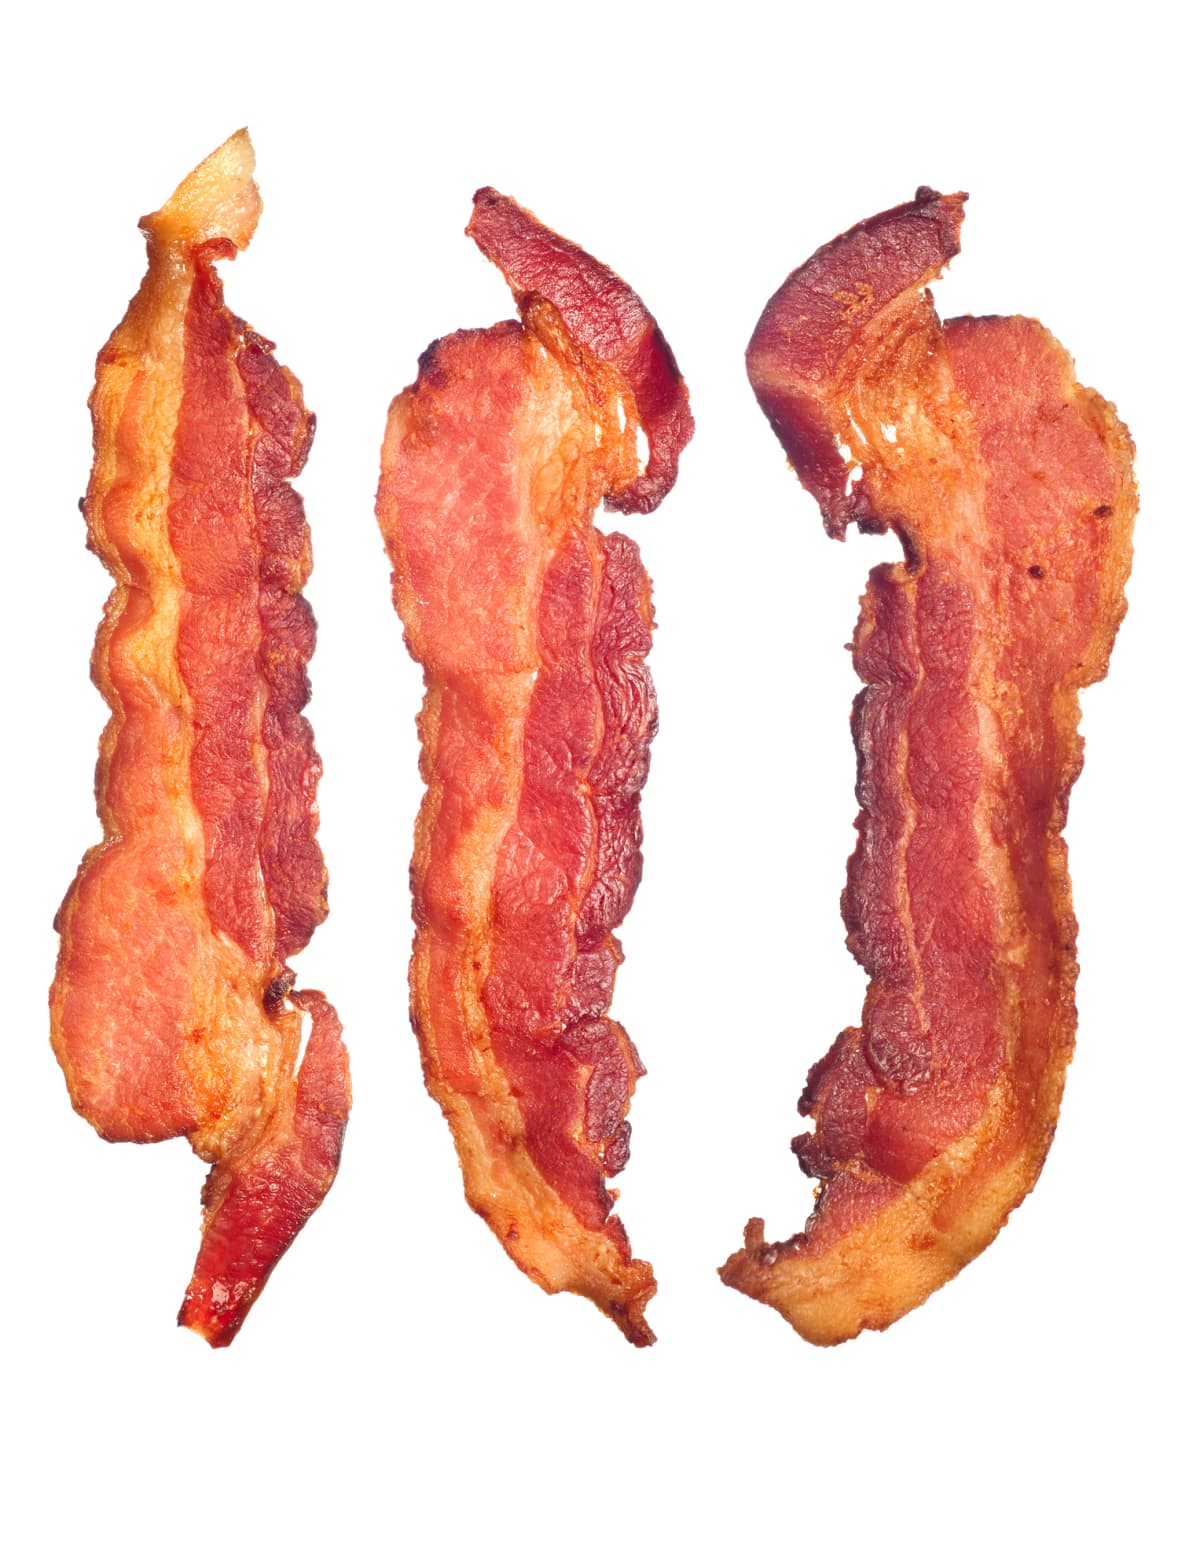 "Three cooked, crispy fried bacon isolated on a white background.  Good for many health and cooking inferences."